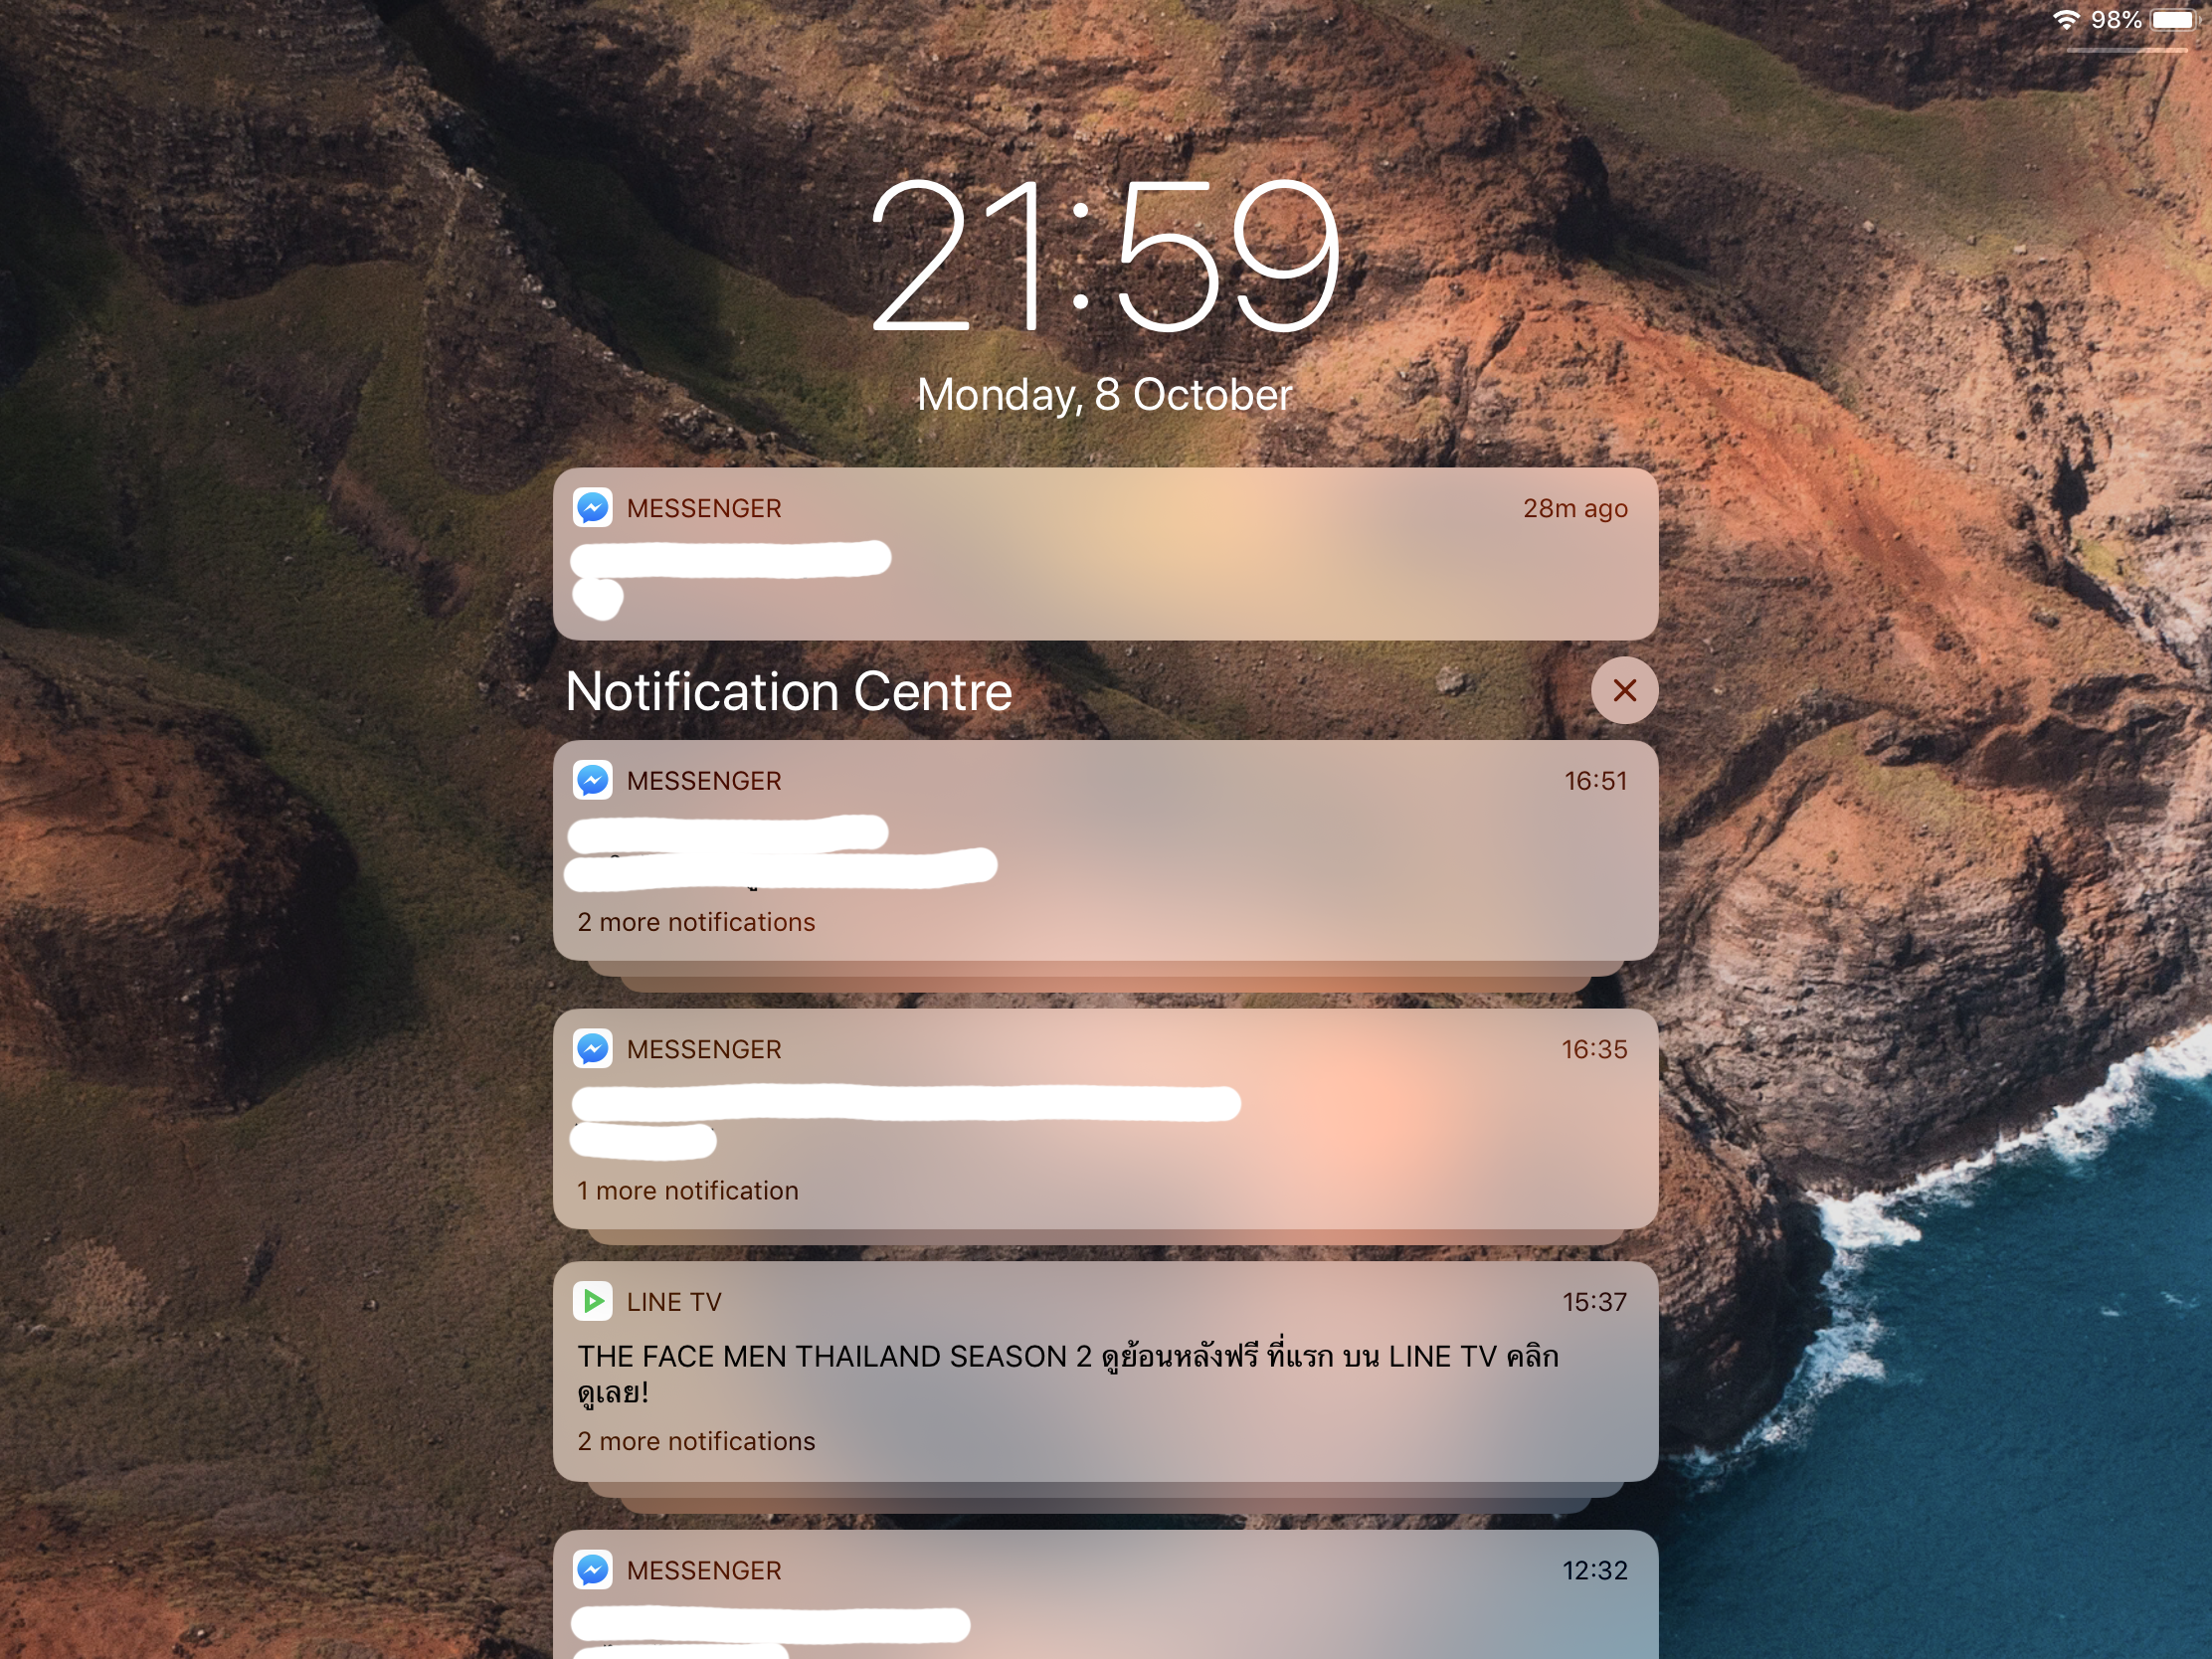 iOS 12 Group Notifications